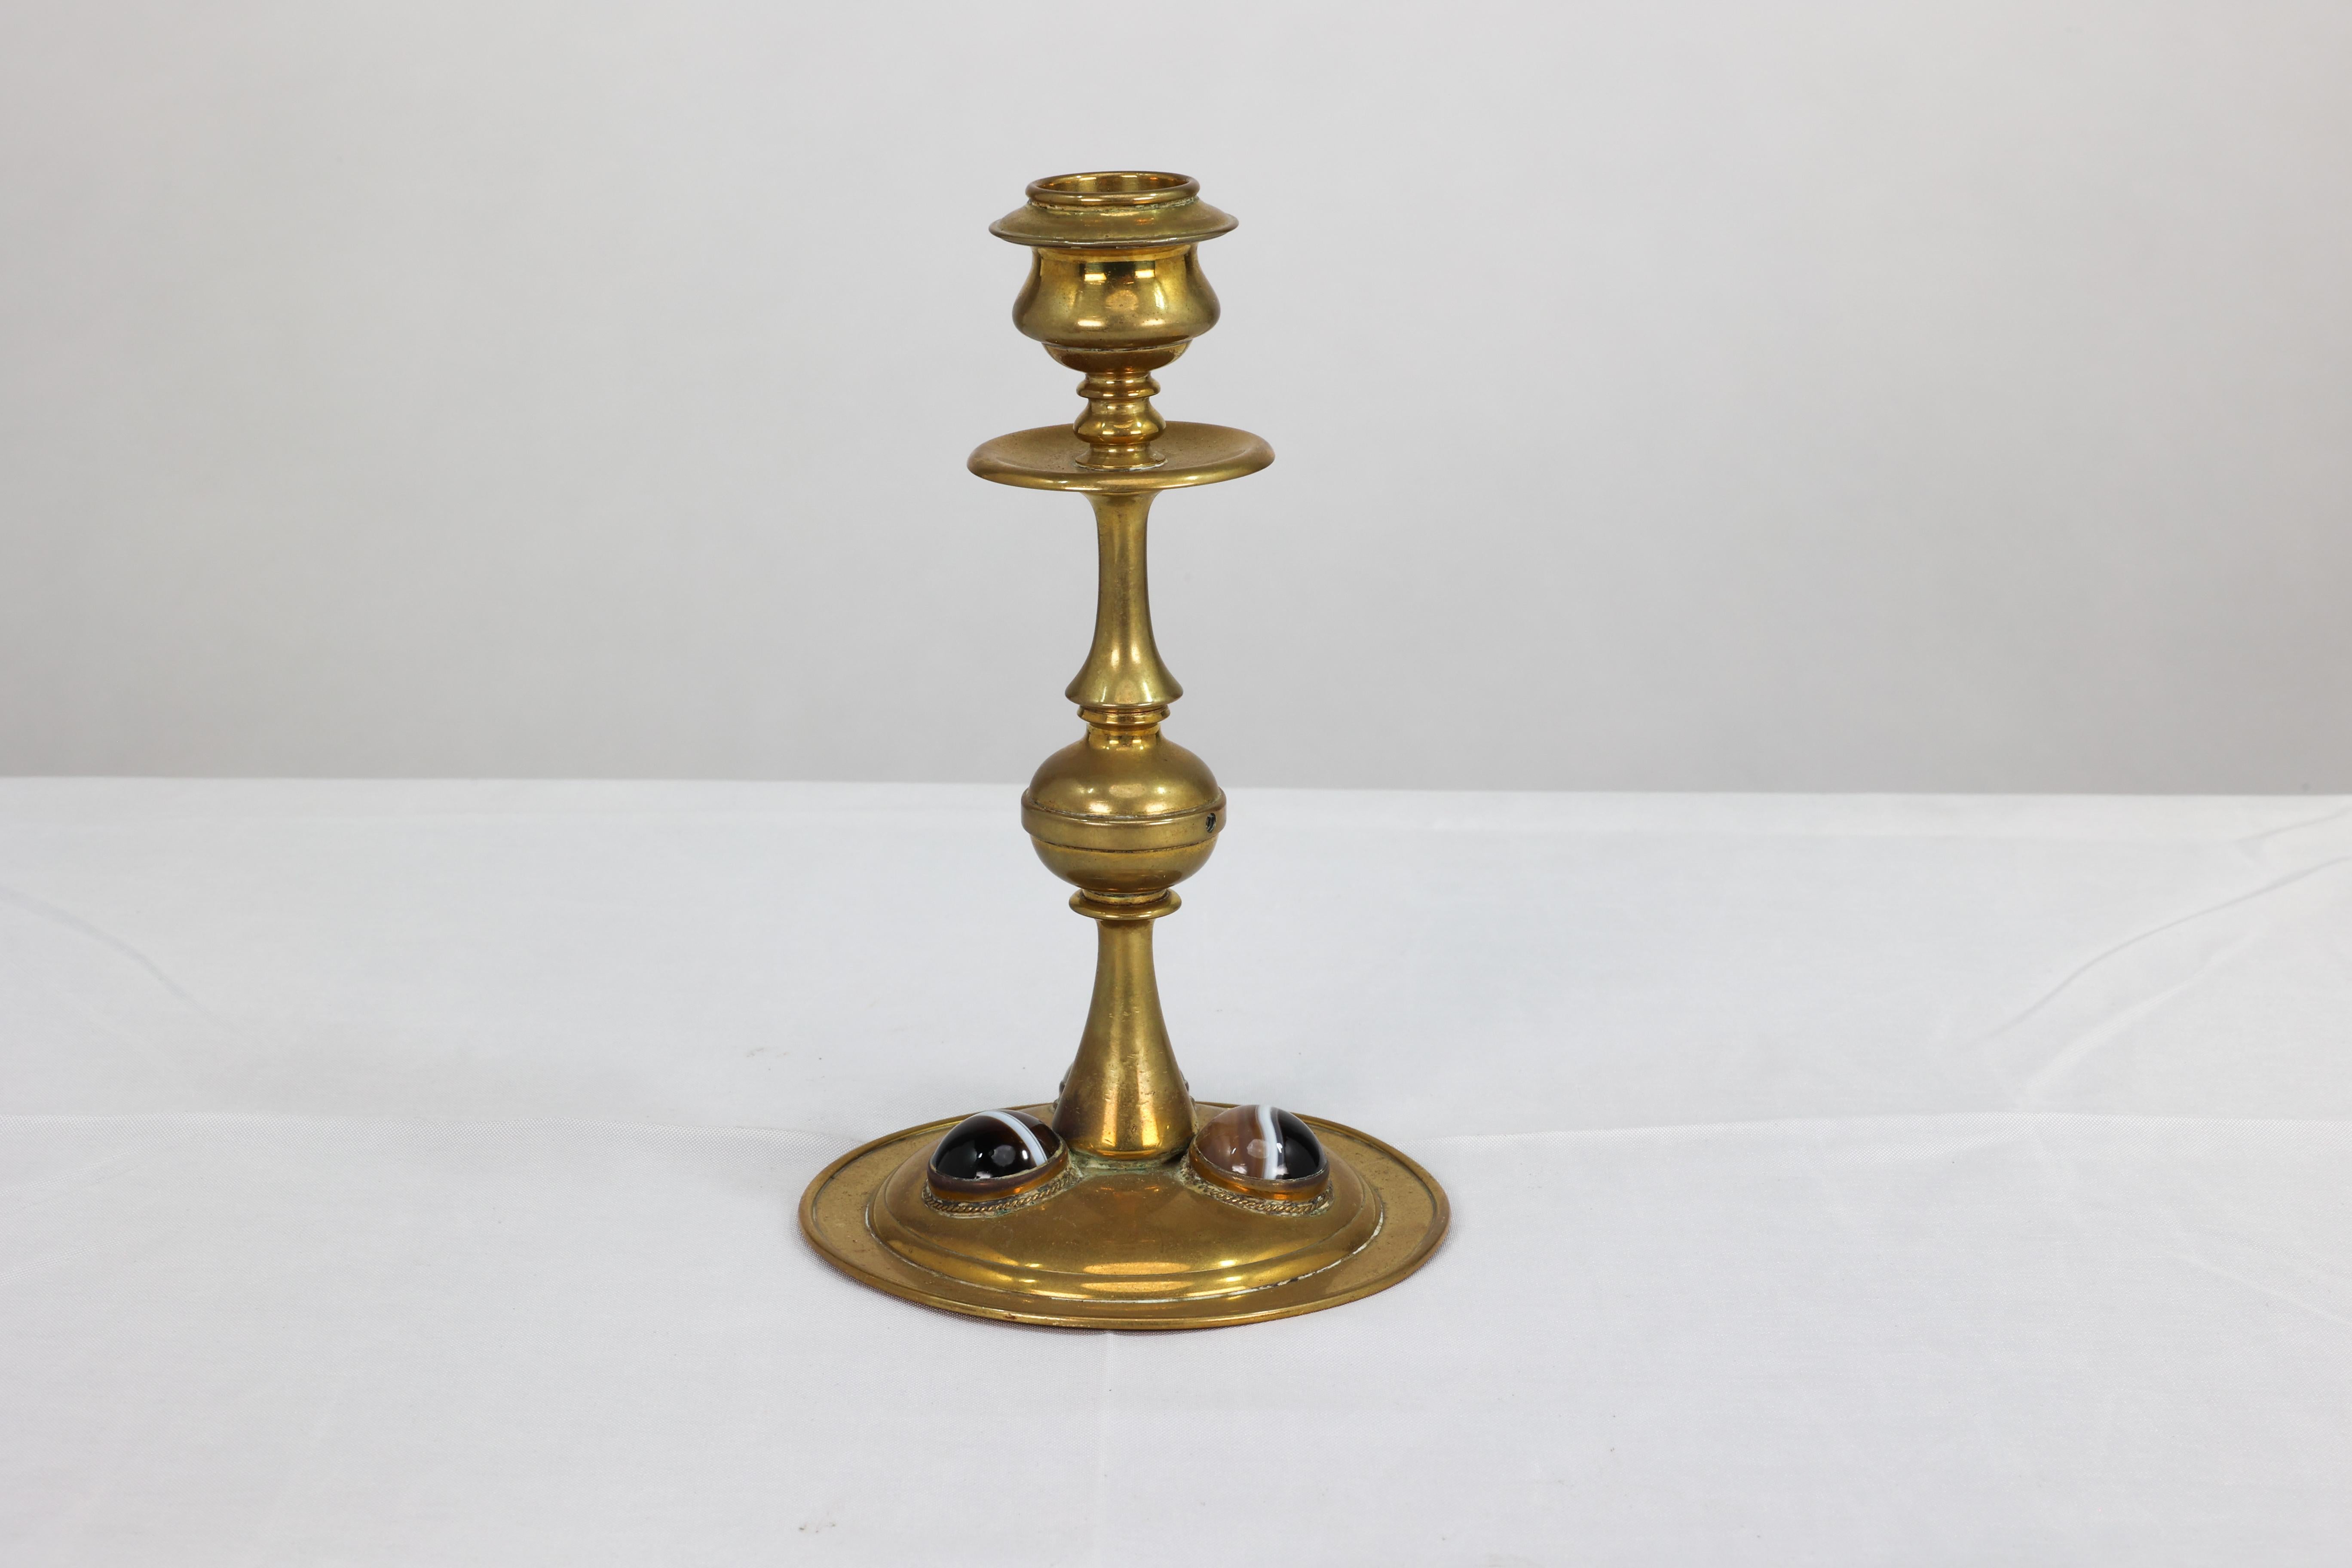 Brass Gothic Revival brass desk set with a pair of candlesticks & a matching pen tray. For Sale